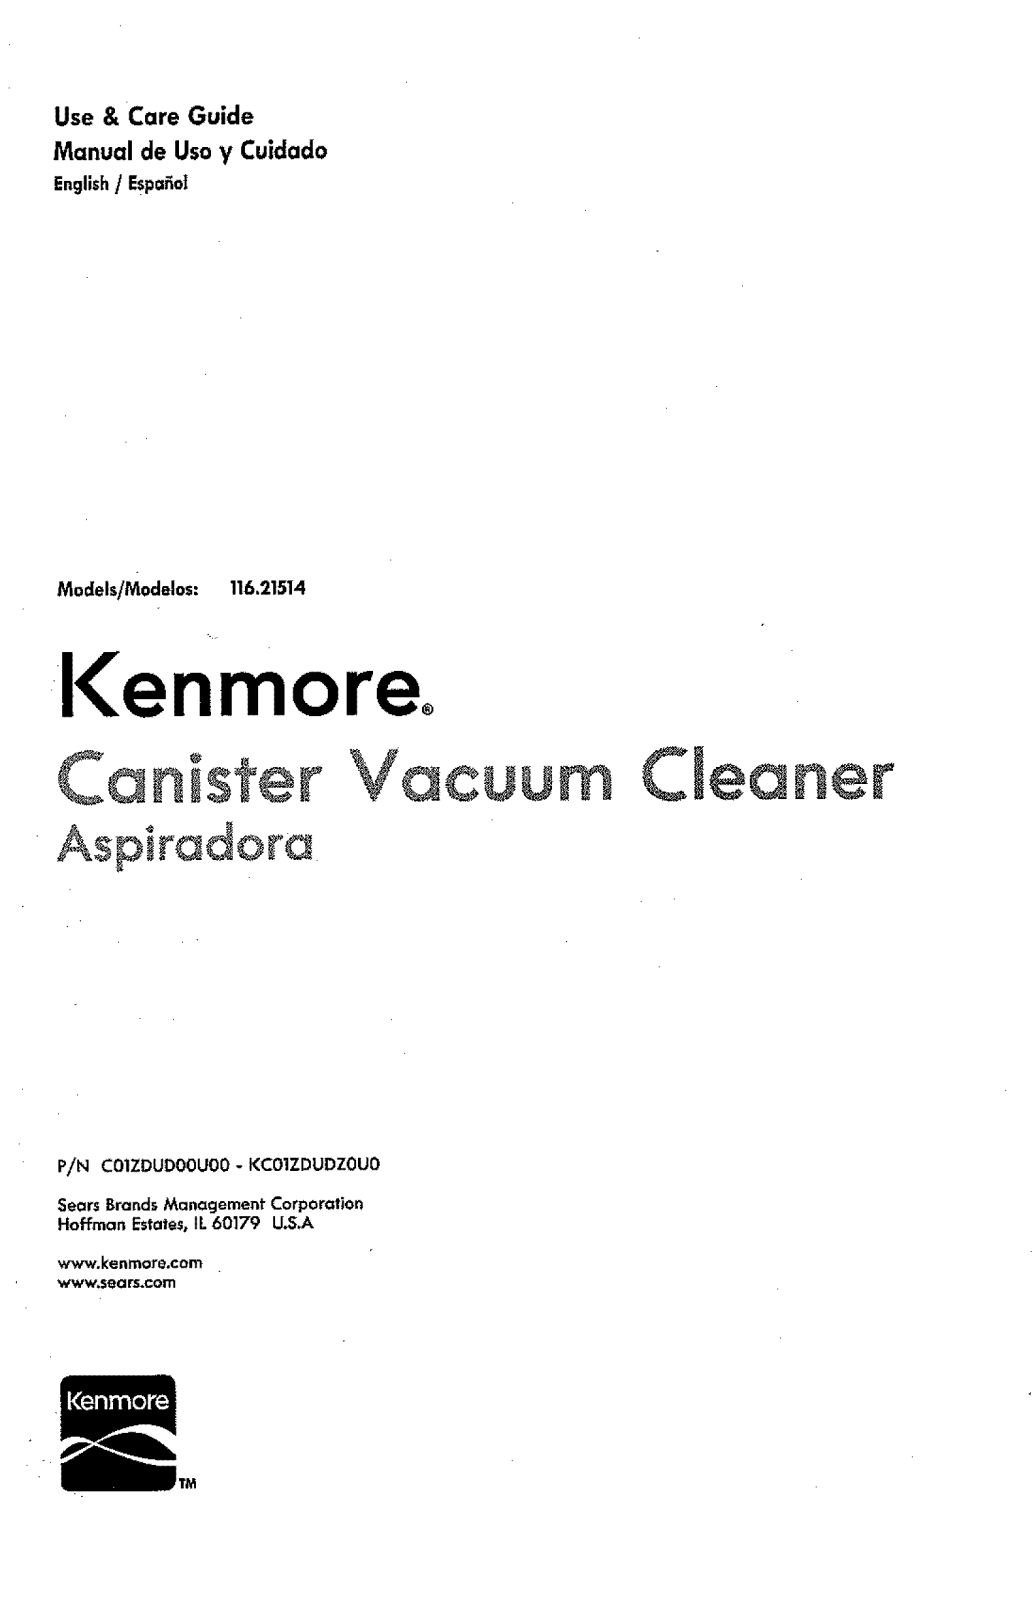 Kenmore Progressive Canister Vacuum Cleaner, 21514 Owner's Manual